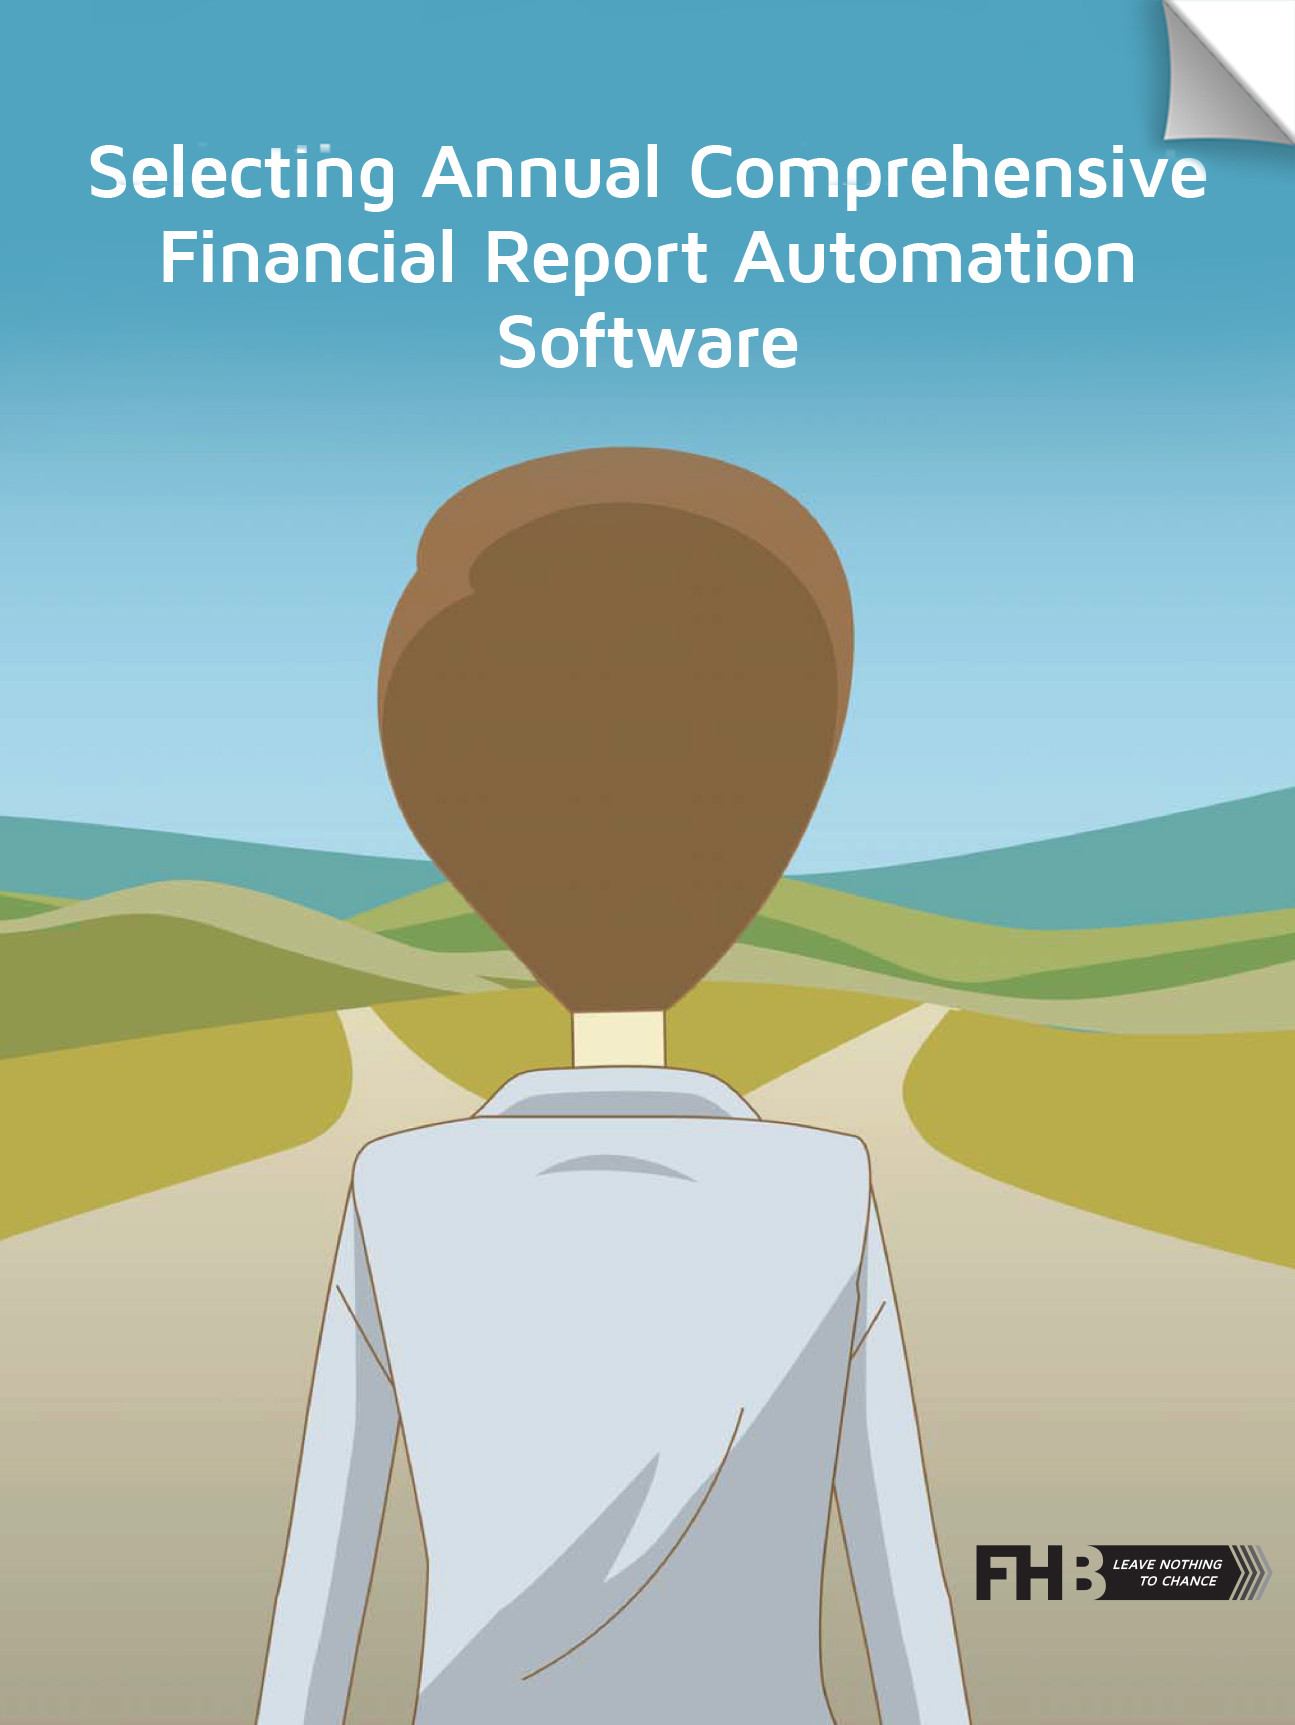 Selecting a Comprehensive Annual Financial Report Automation Software eBook